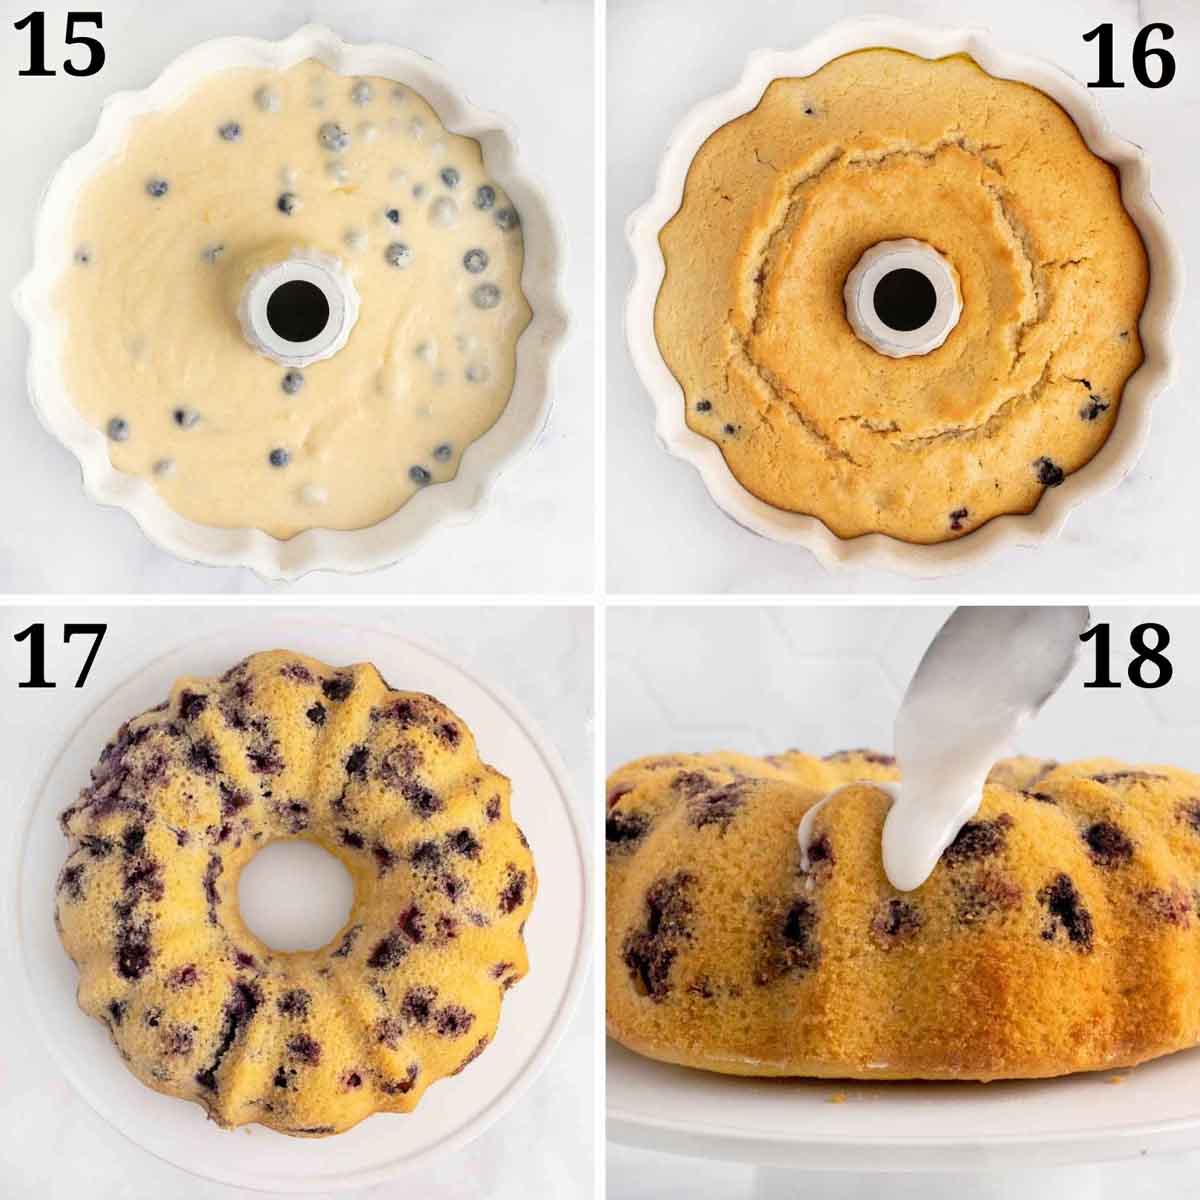 four images showing how to bake and finish the pound cake